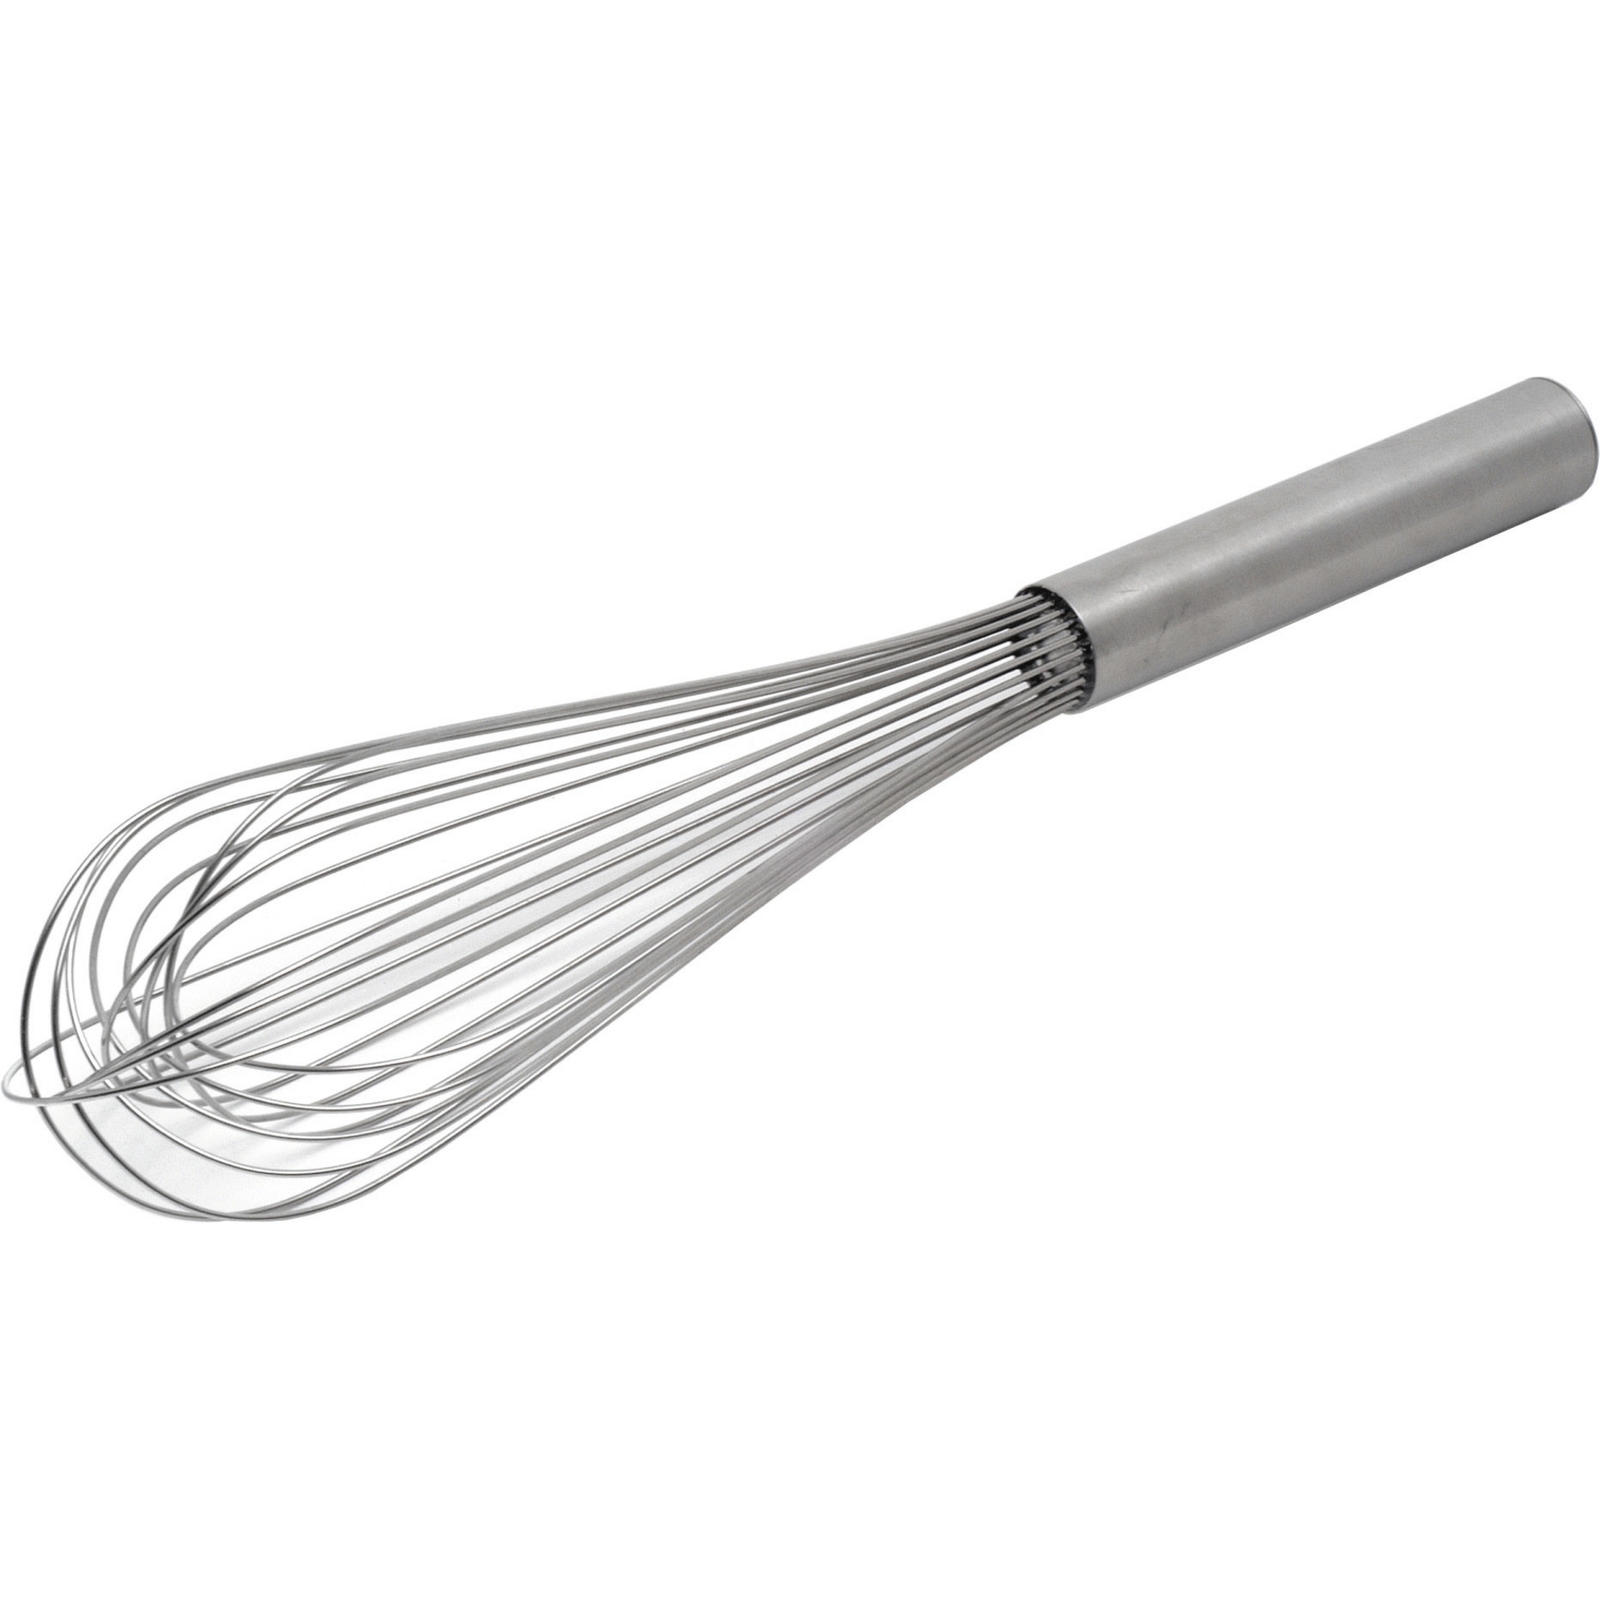 Stainless Steel Heavy Duty French Whisk